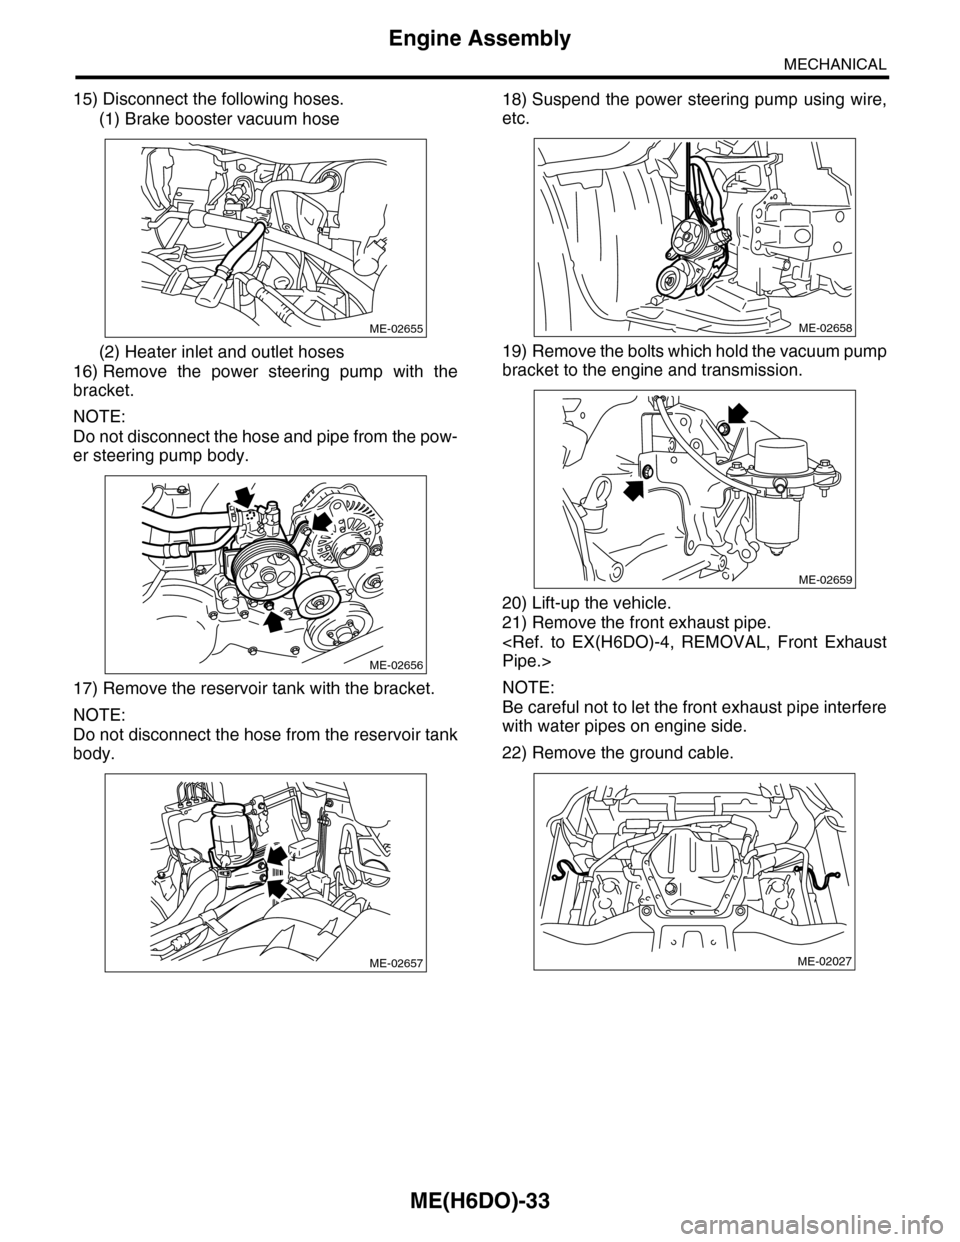 SUBARU TRIBECA 2009 1.G Service Workshop Manual ME(H6DO)-33
Engine Assembly
MECHANICAL
15) Disconnect the following hoses.
(1) Brake booster vacuum hose
(2) Heater inlet and outlet hoses
16) Remove  the  power  steering  pump  with  the
bracket.
NO